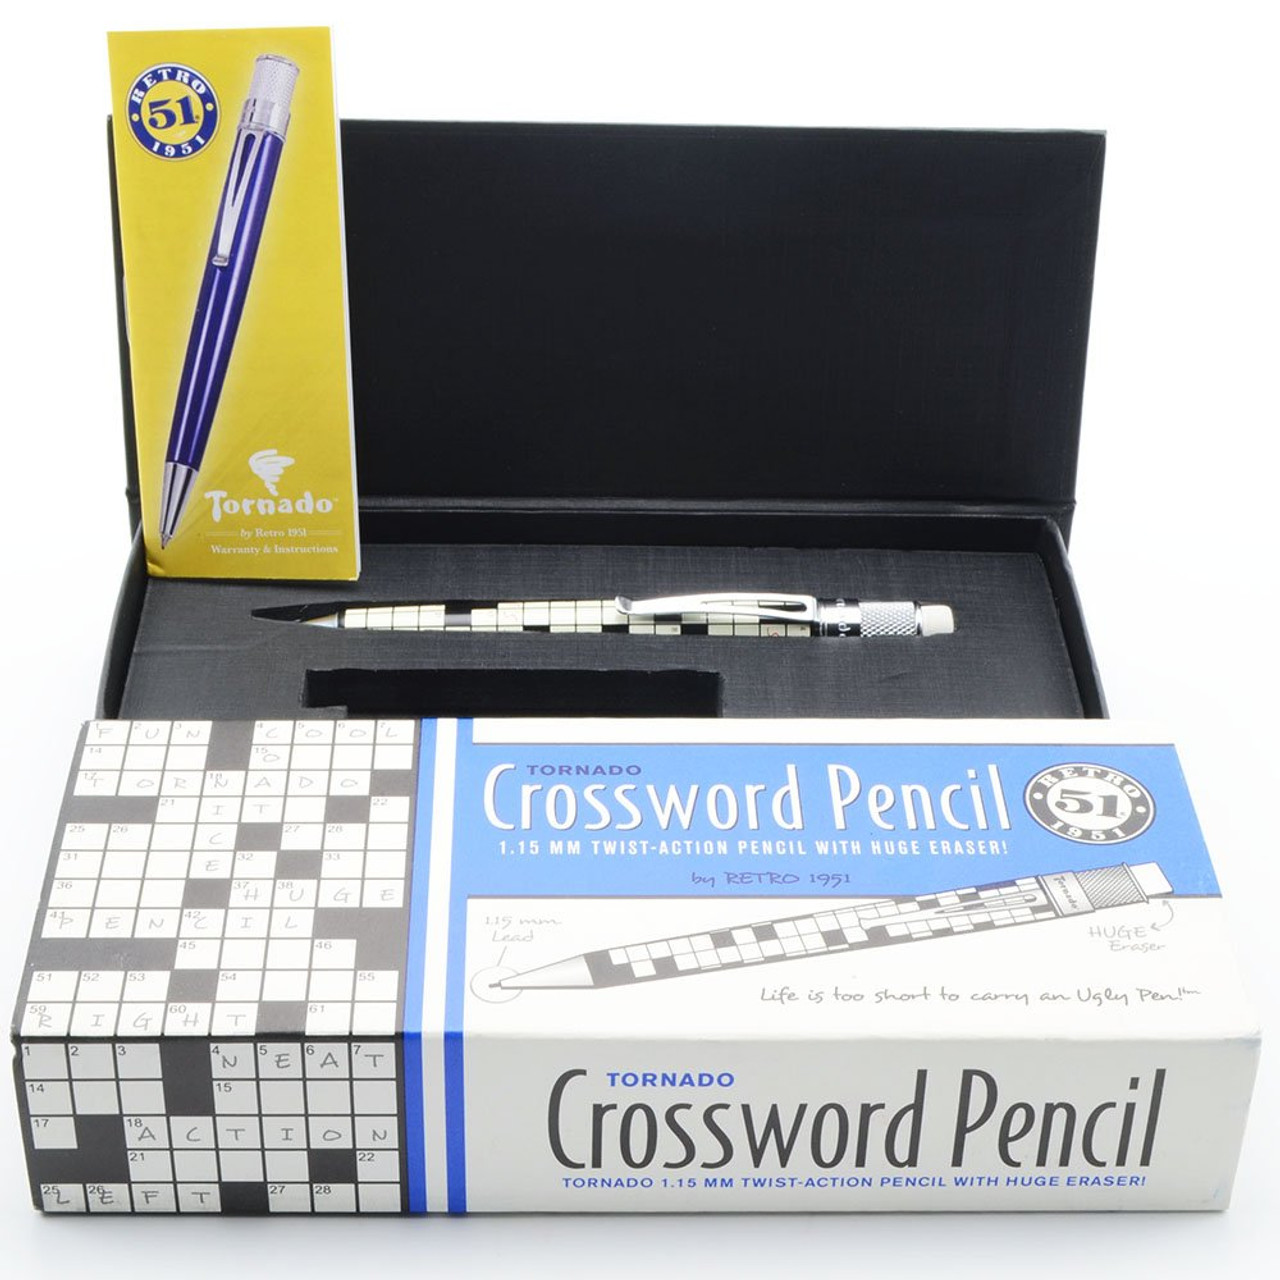 Retro 51 Tornado Mechanical Pencil (2010s) - Crossword, 1.15mm Leads (Excellent + in Box, Works Well)